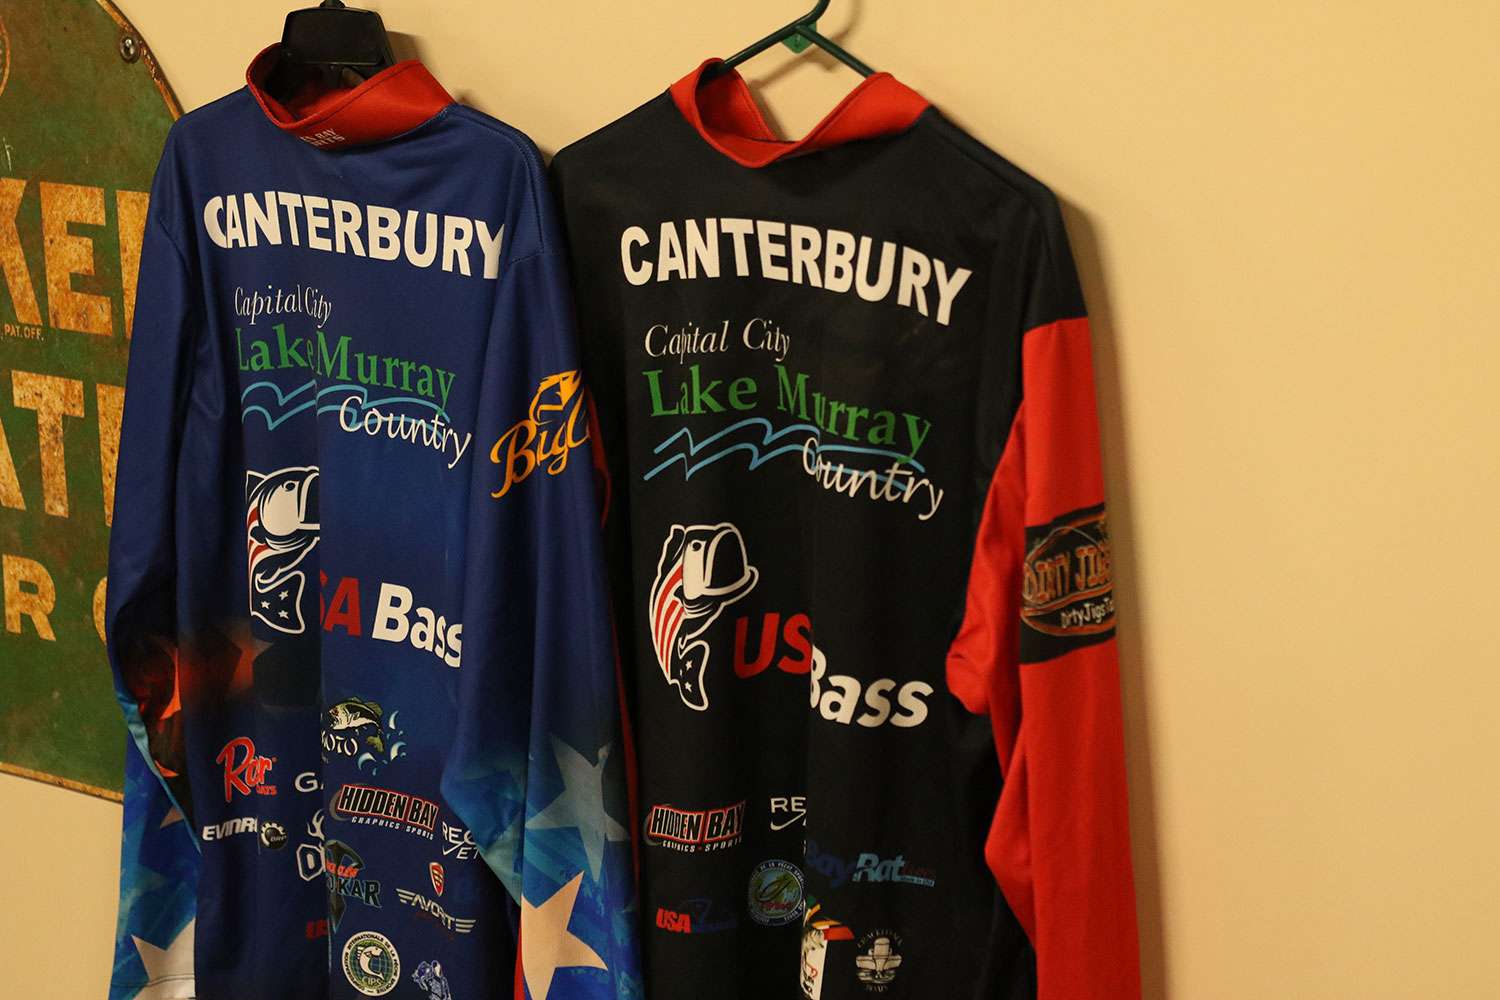 A pair of jerseys for the USA Bass Team.